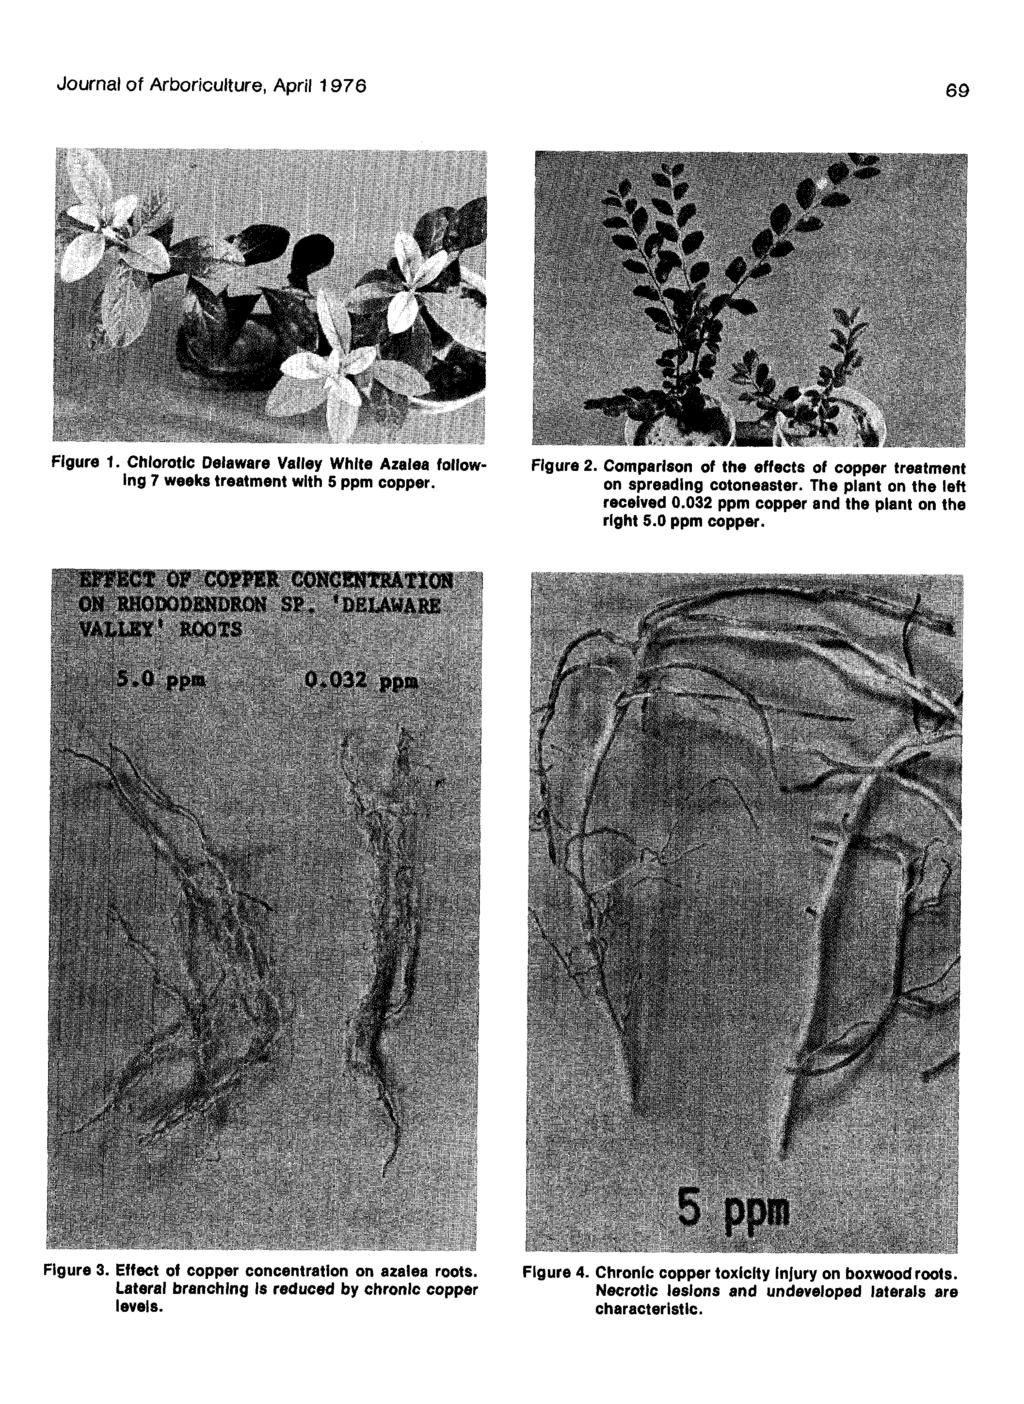 Journal of Arboriculture, April 176 6 Figure 1. Chlorotic Delaware Valley White Azalea following 7 weeks treatment with 5 pptn copper. Figure. Comparison of the effects of copper treatment on spreading cotoneaster.